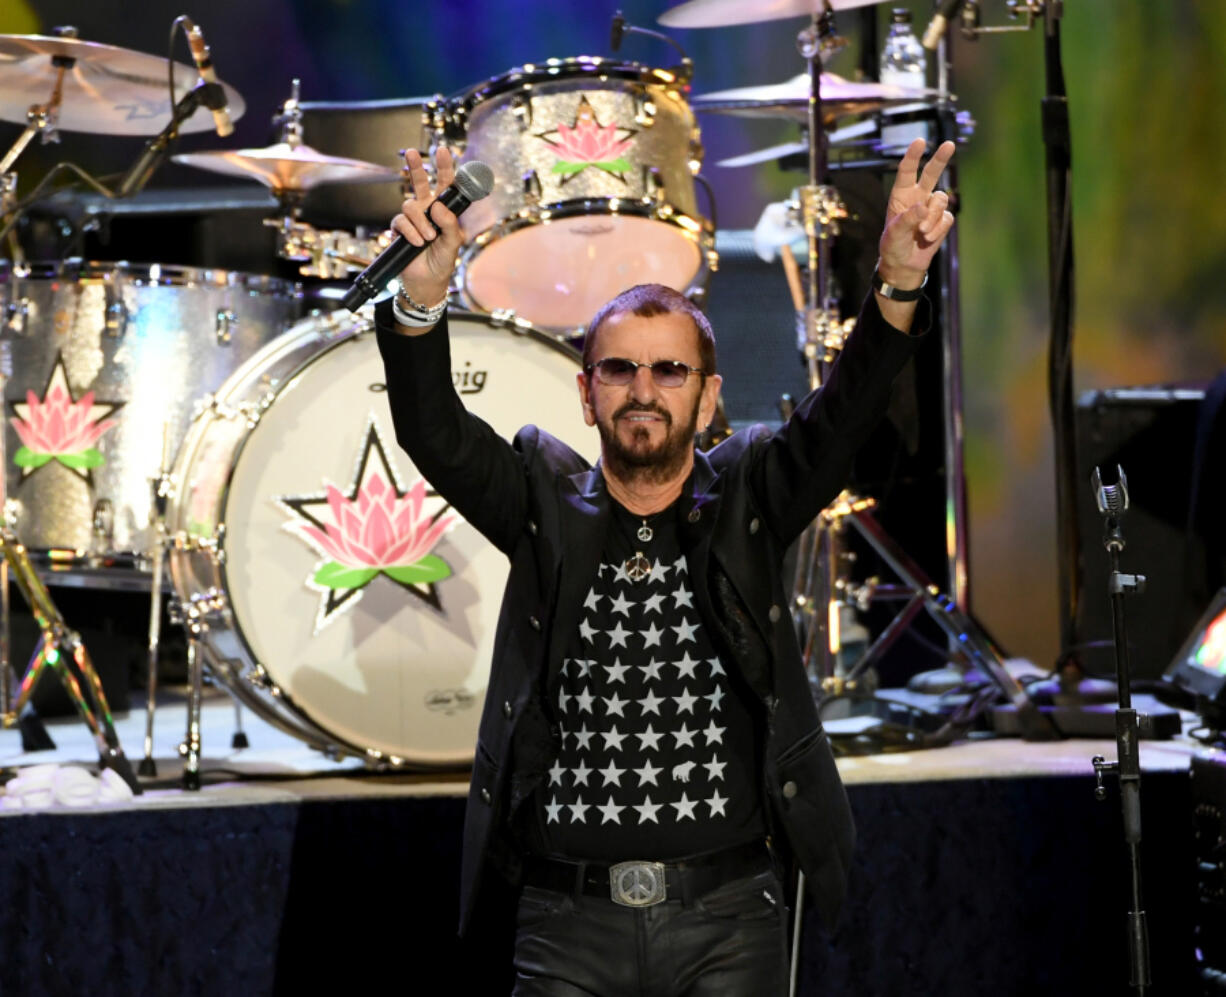 Ringo Starr performs during the Ringo Starr and his All Starr Band concert at the Greek Theatre on Sept. 1, 2019, in Los Angeles.